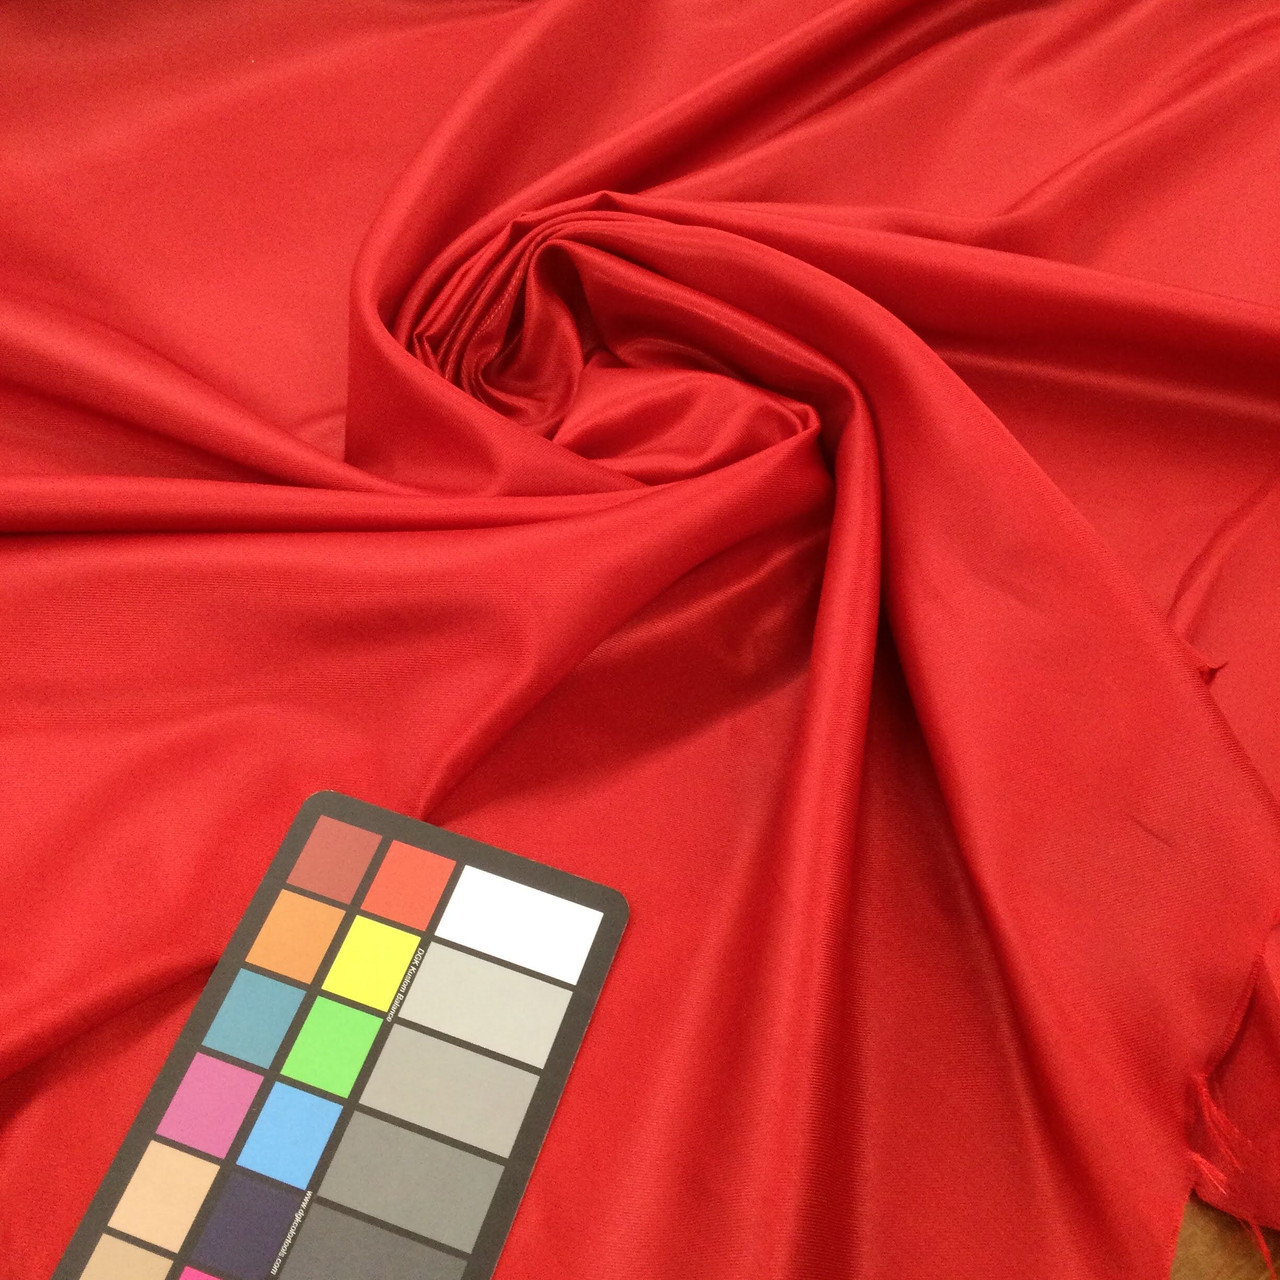 Bright Red Polyester Satin Lining Fabric / Bias Stripe Texture / Clothing  and Apparel / Sold by the Yard / 60 inch wide